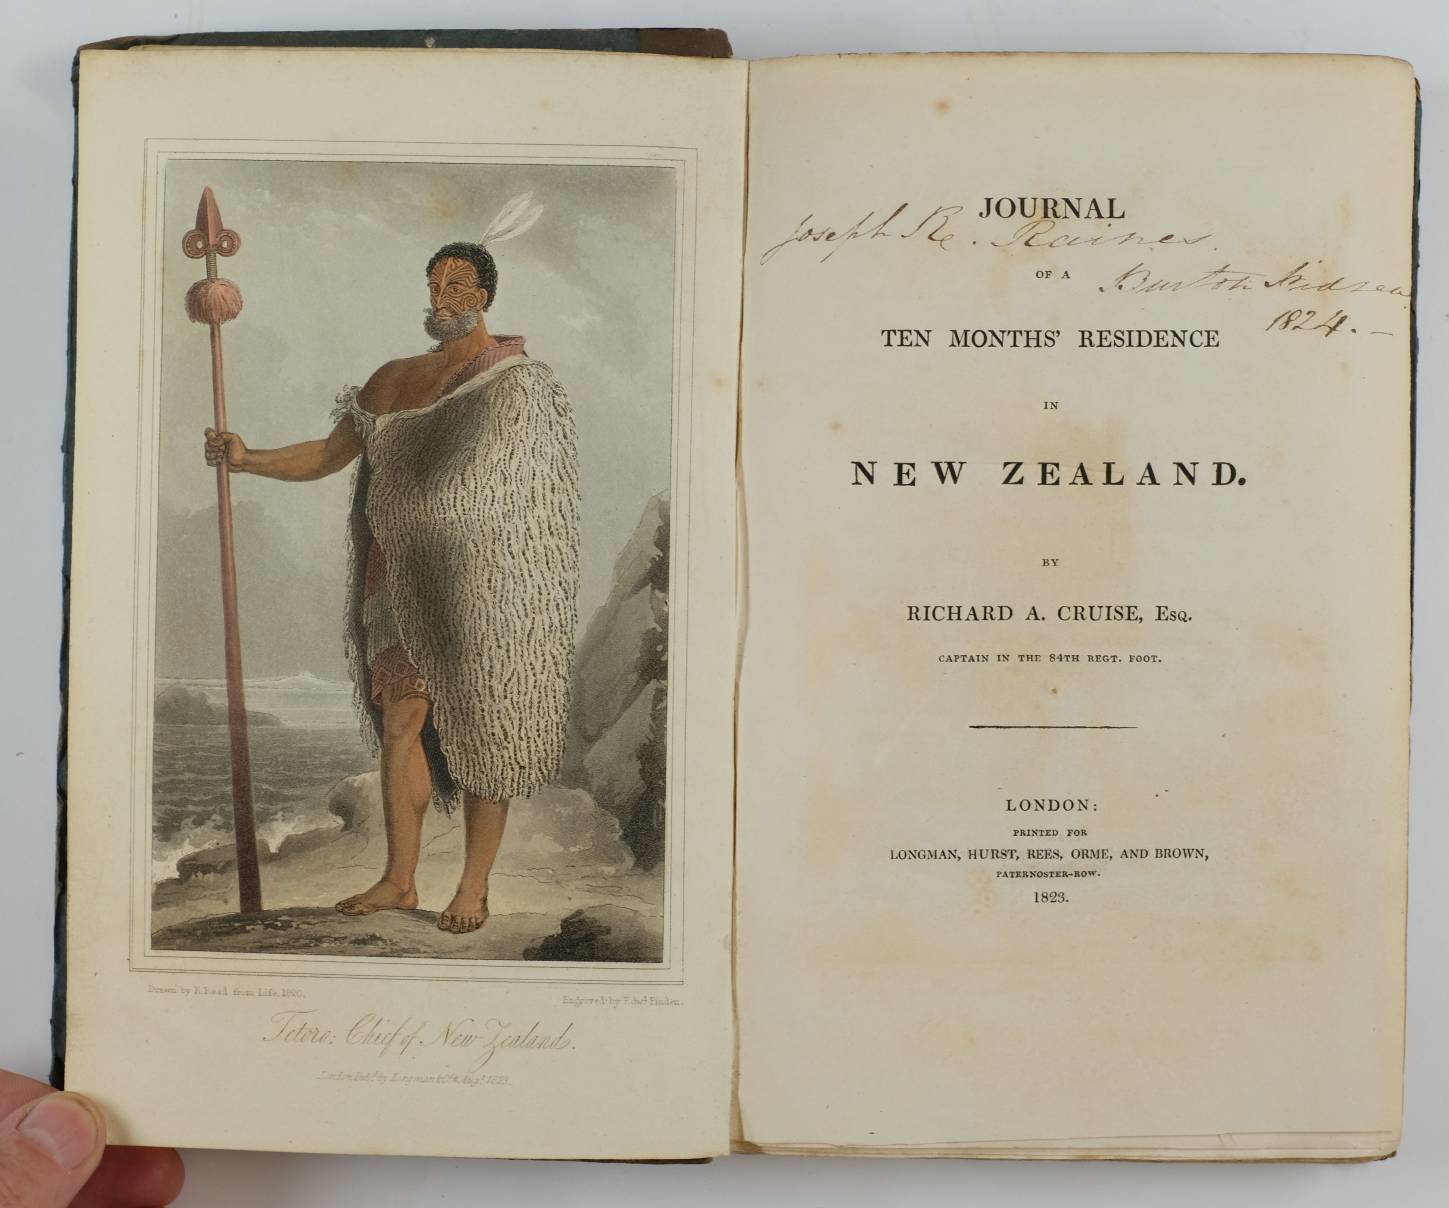 Cruise (Richard A.). Journal of a Ten Months' Residence in New Zealand, 1st edition, 1823, hand- - Image 5 of 5